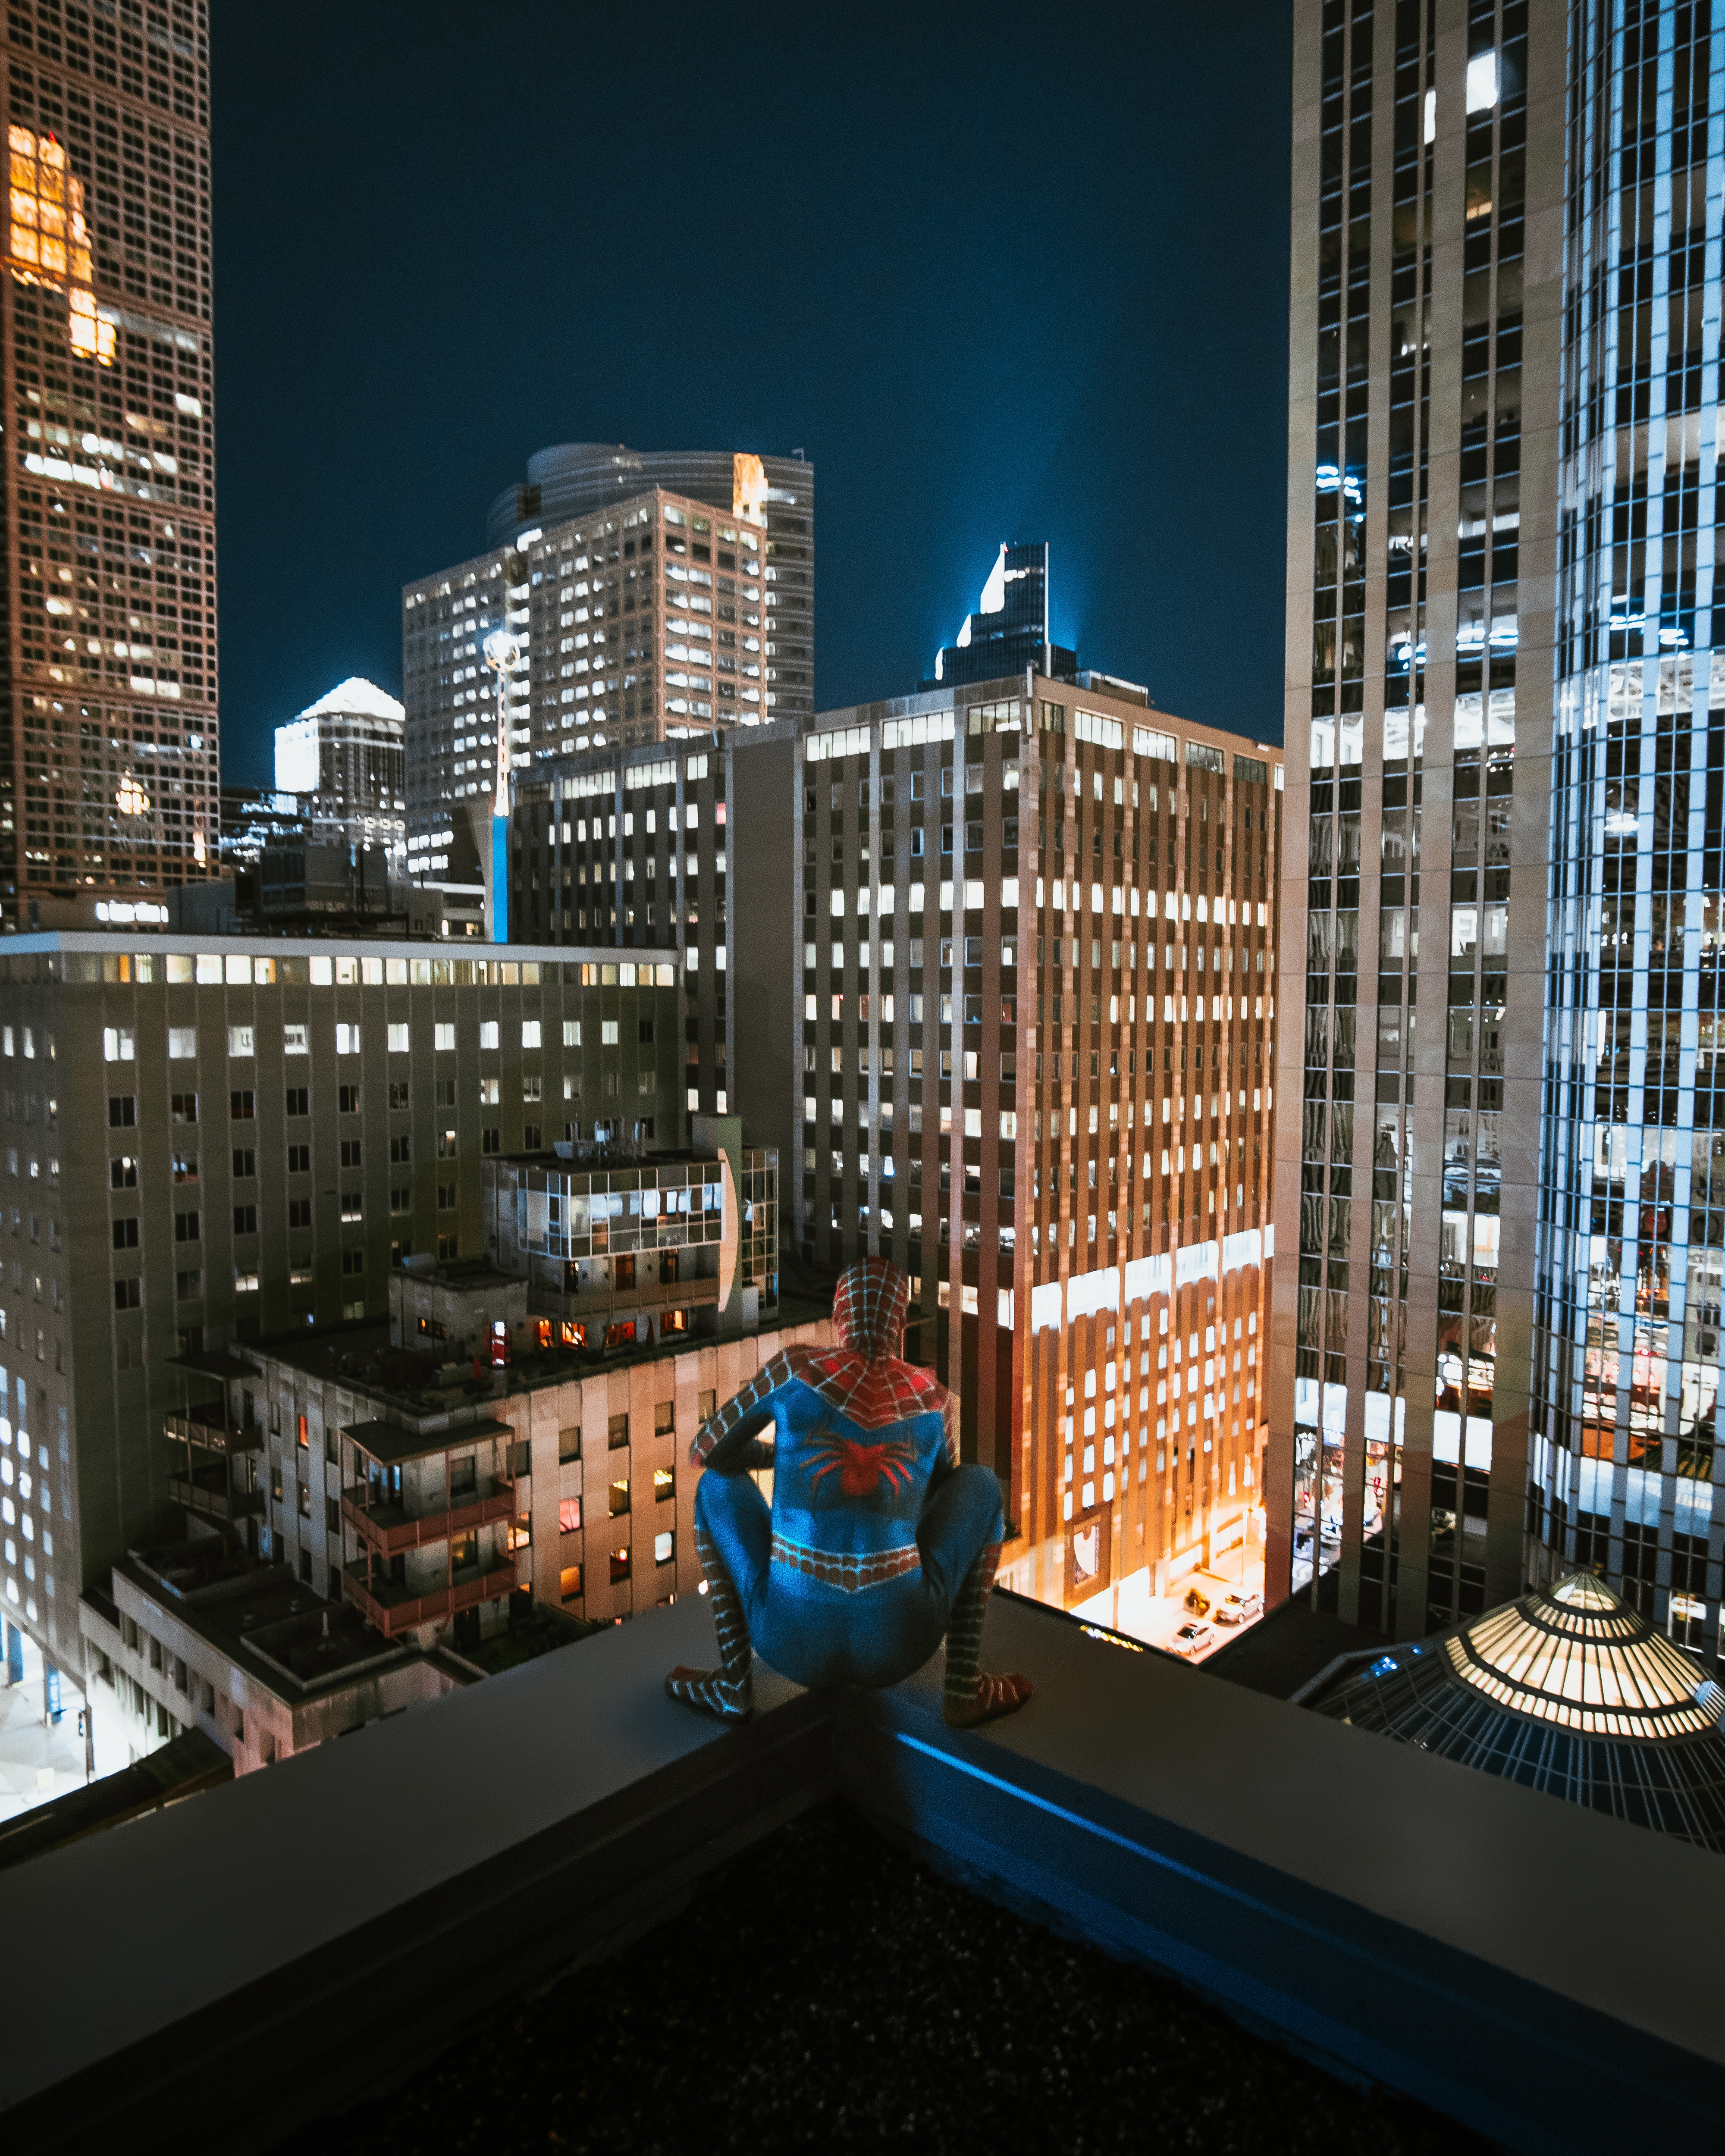 Image of Spiderman at the edge of a skyscraper